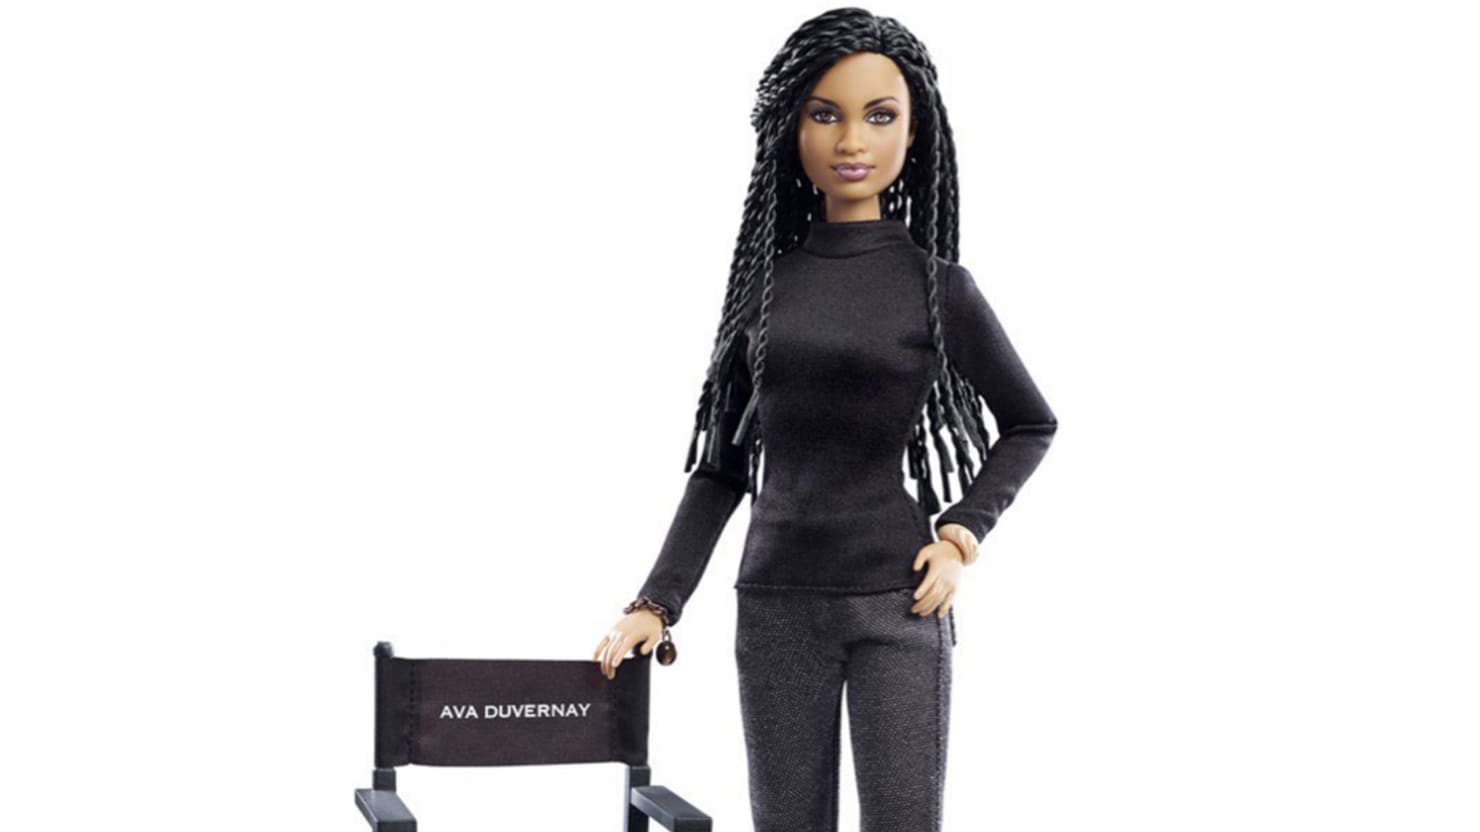 Ava Duvernay Gets Her Own Barbie Doll.